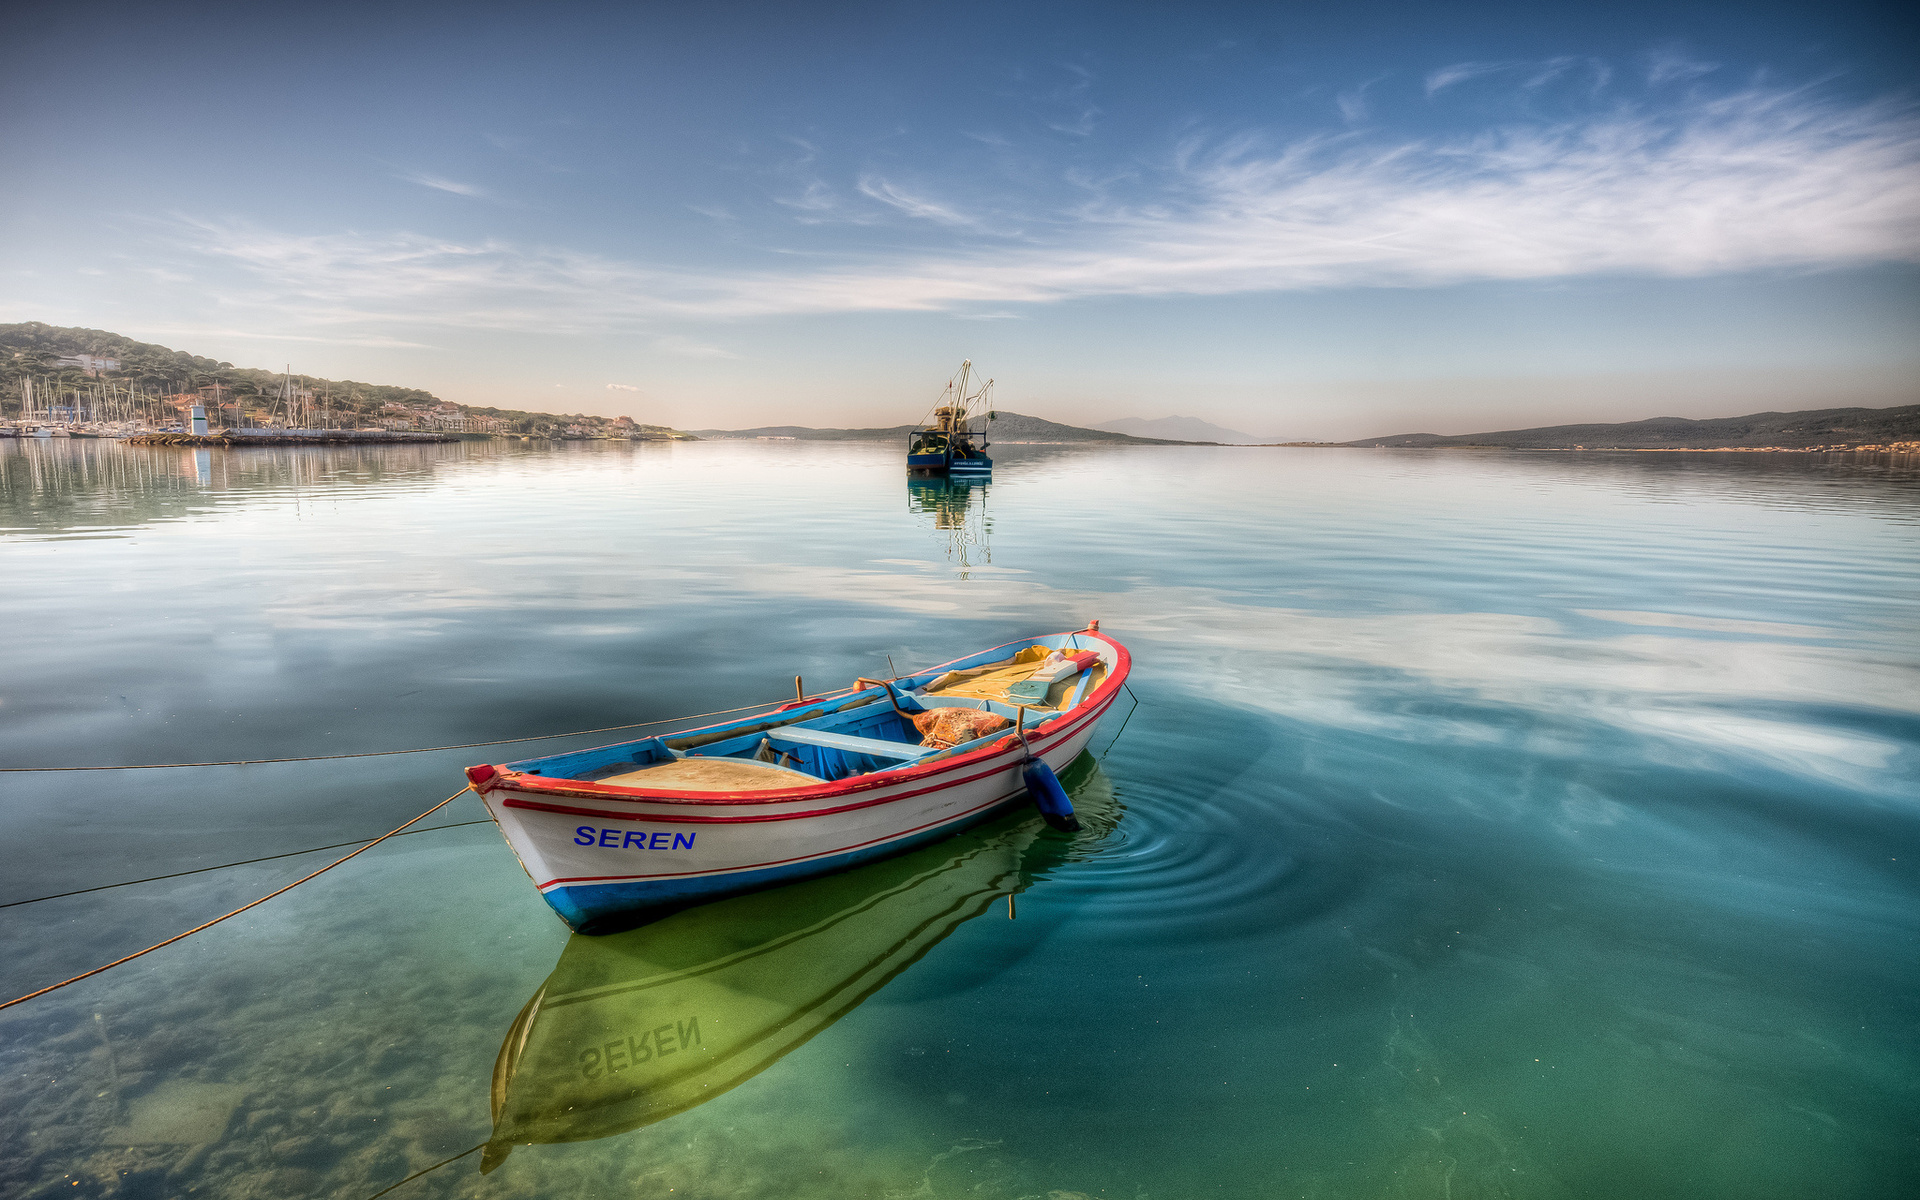 Boat Wallpaper High Quality HD Widescreen Image